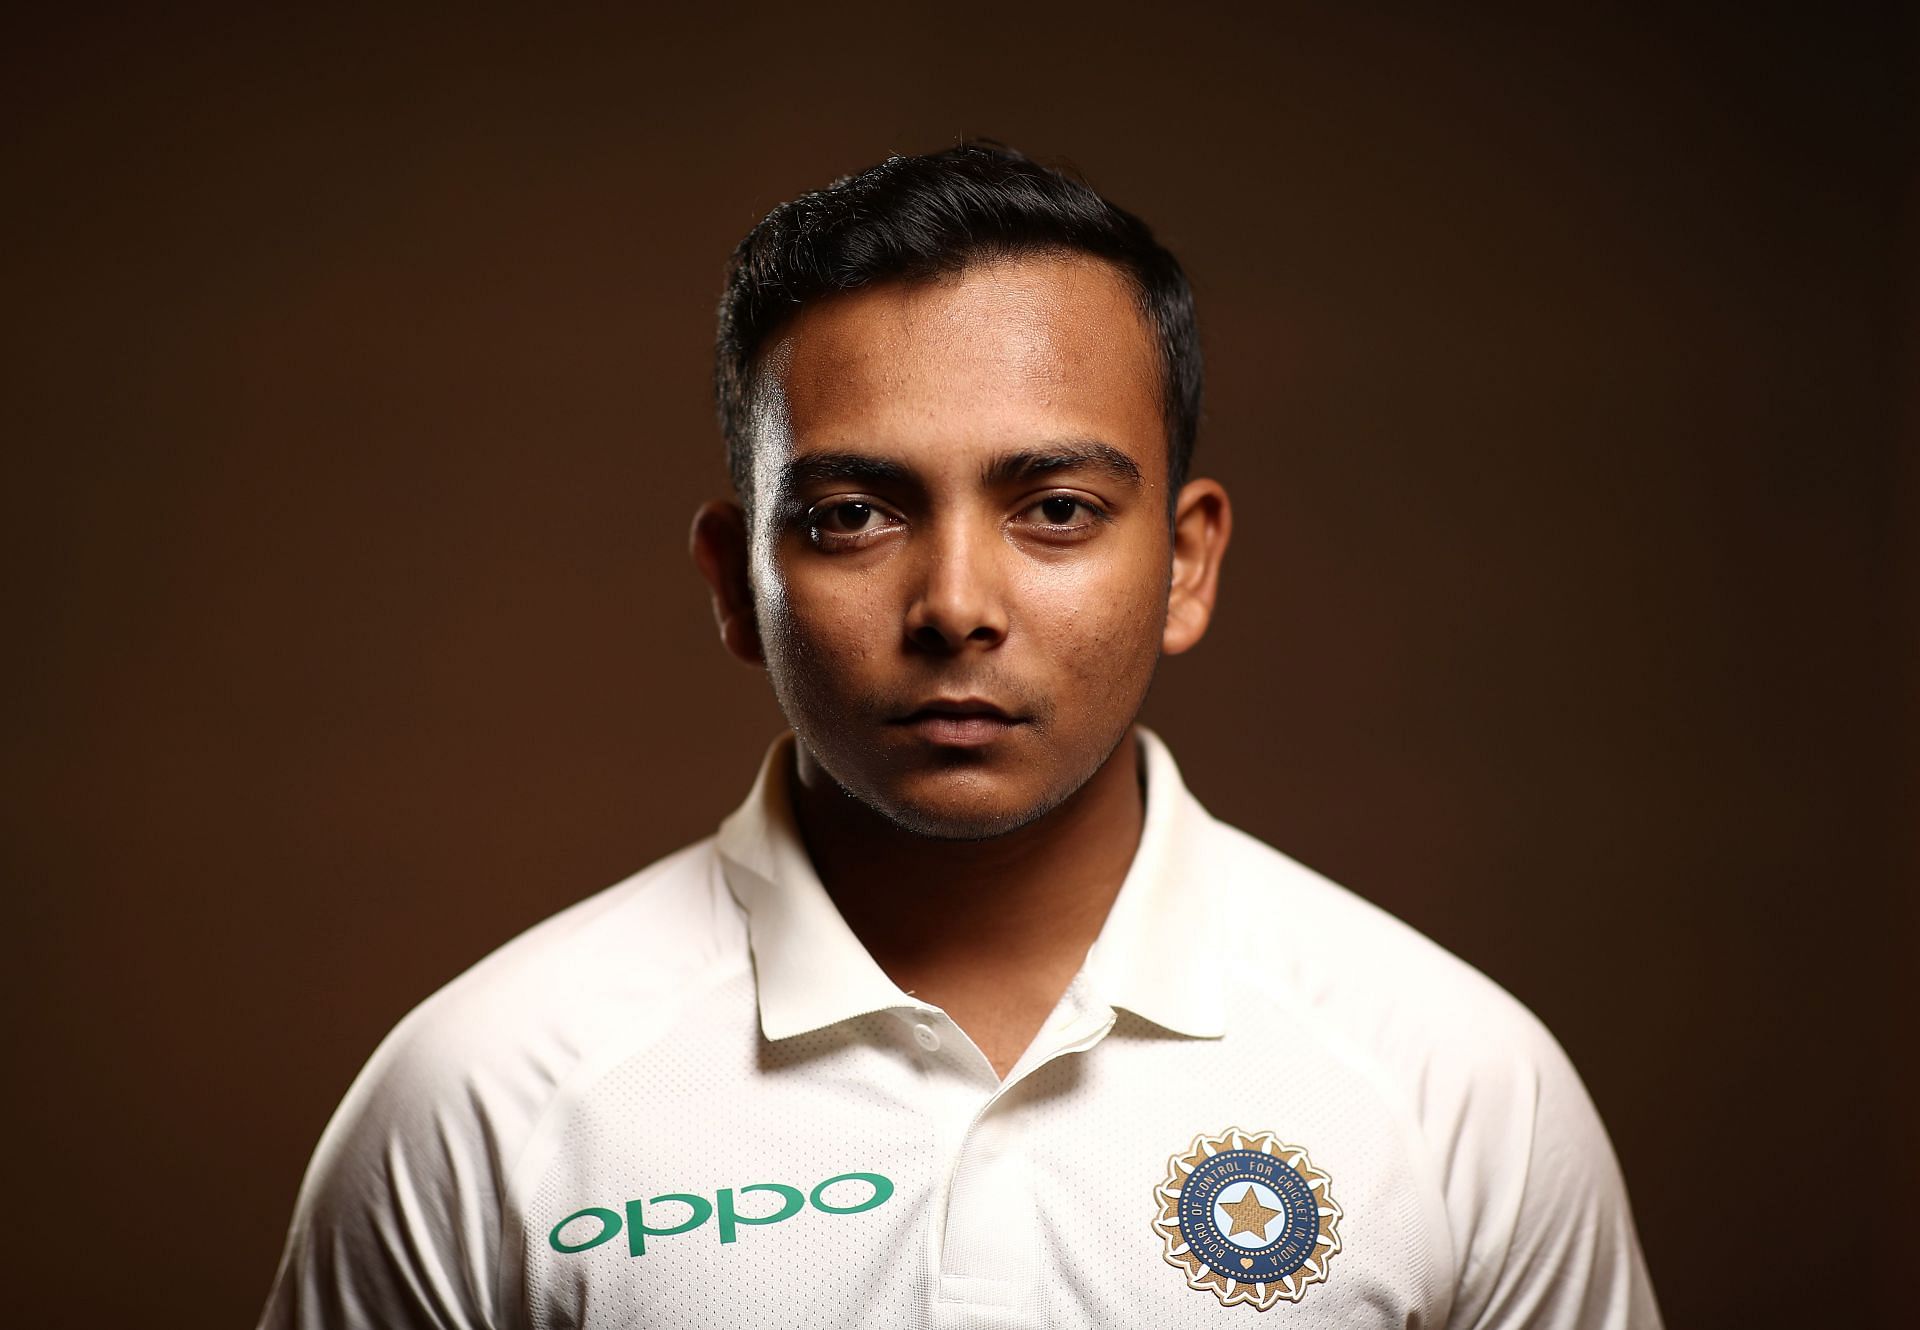 Prithvi Shaw won the Man of the Match award on Test debut against West Indies